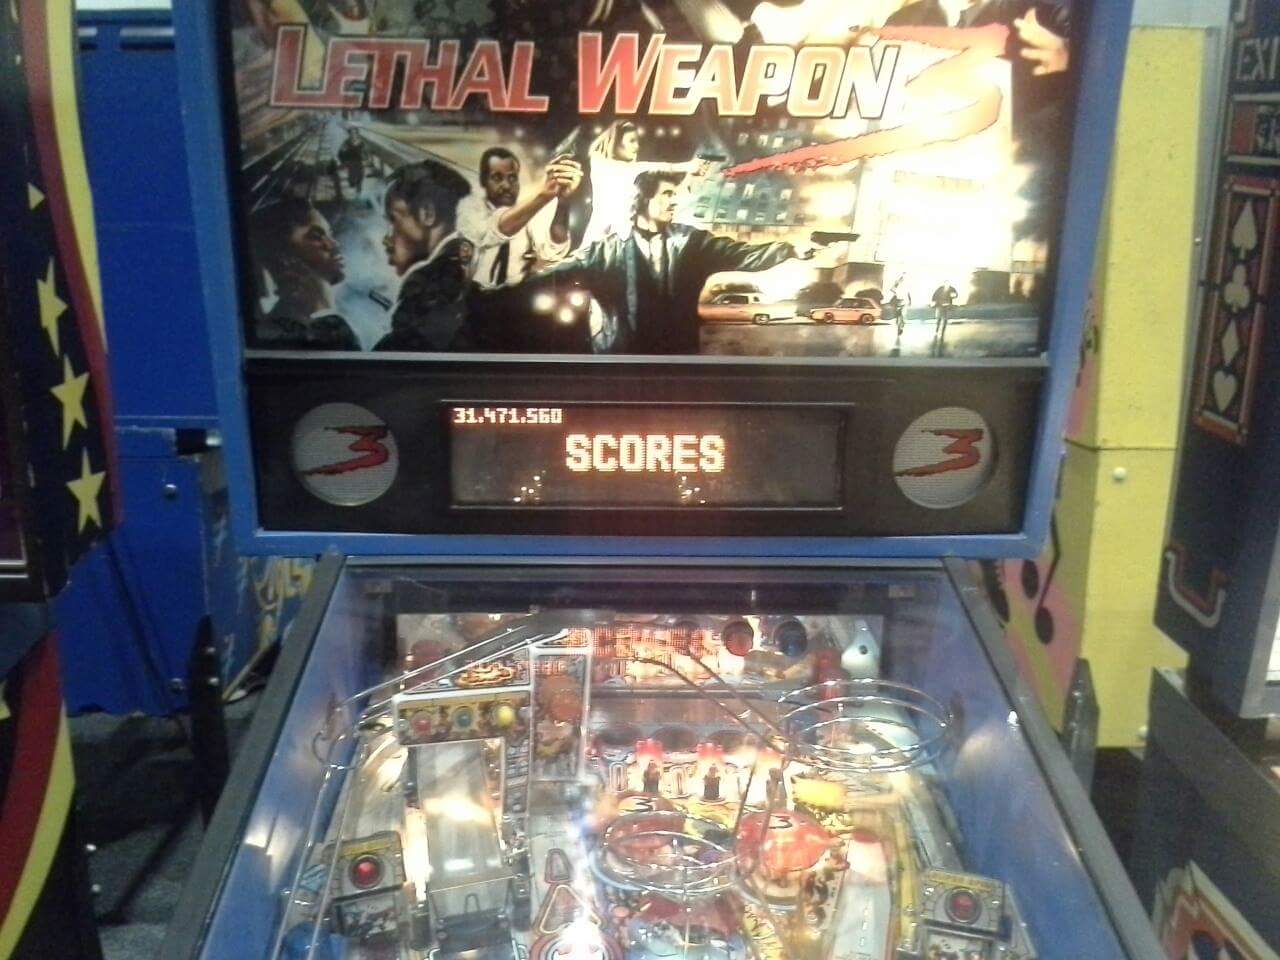 Lethal Weapon 3 31,471,560 points